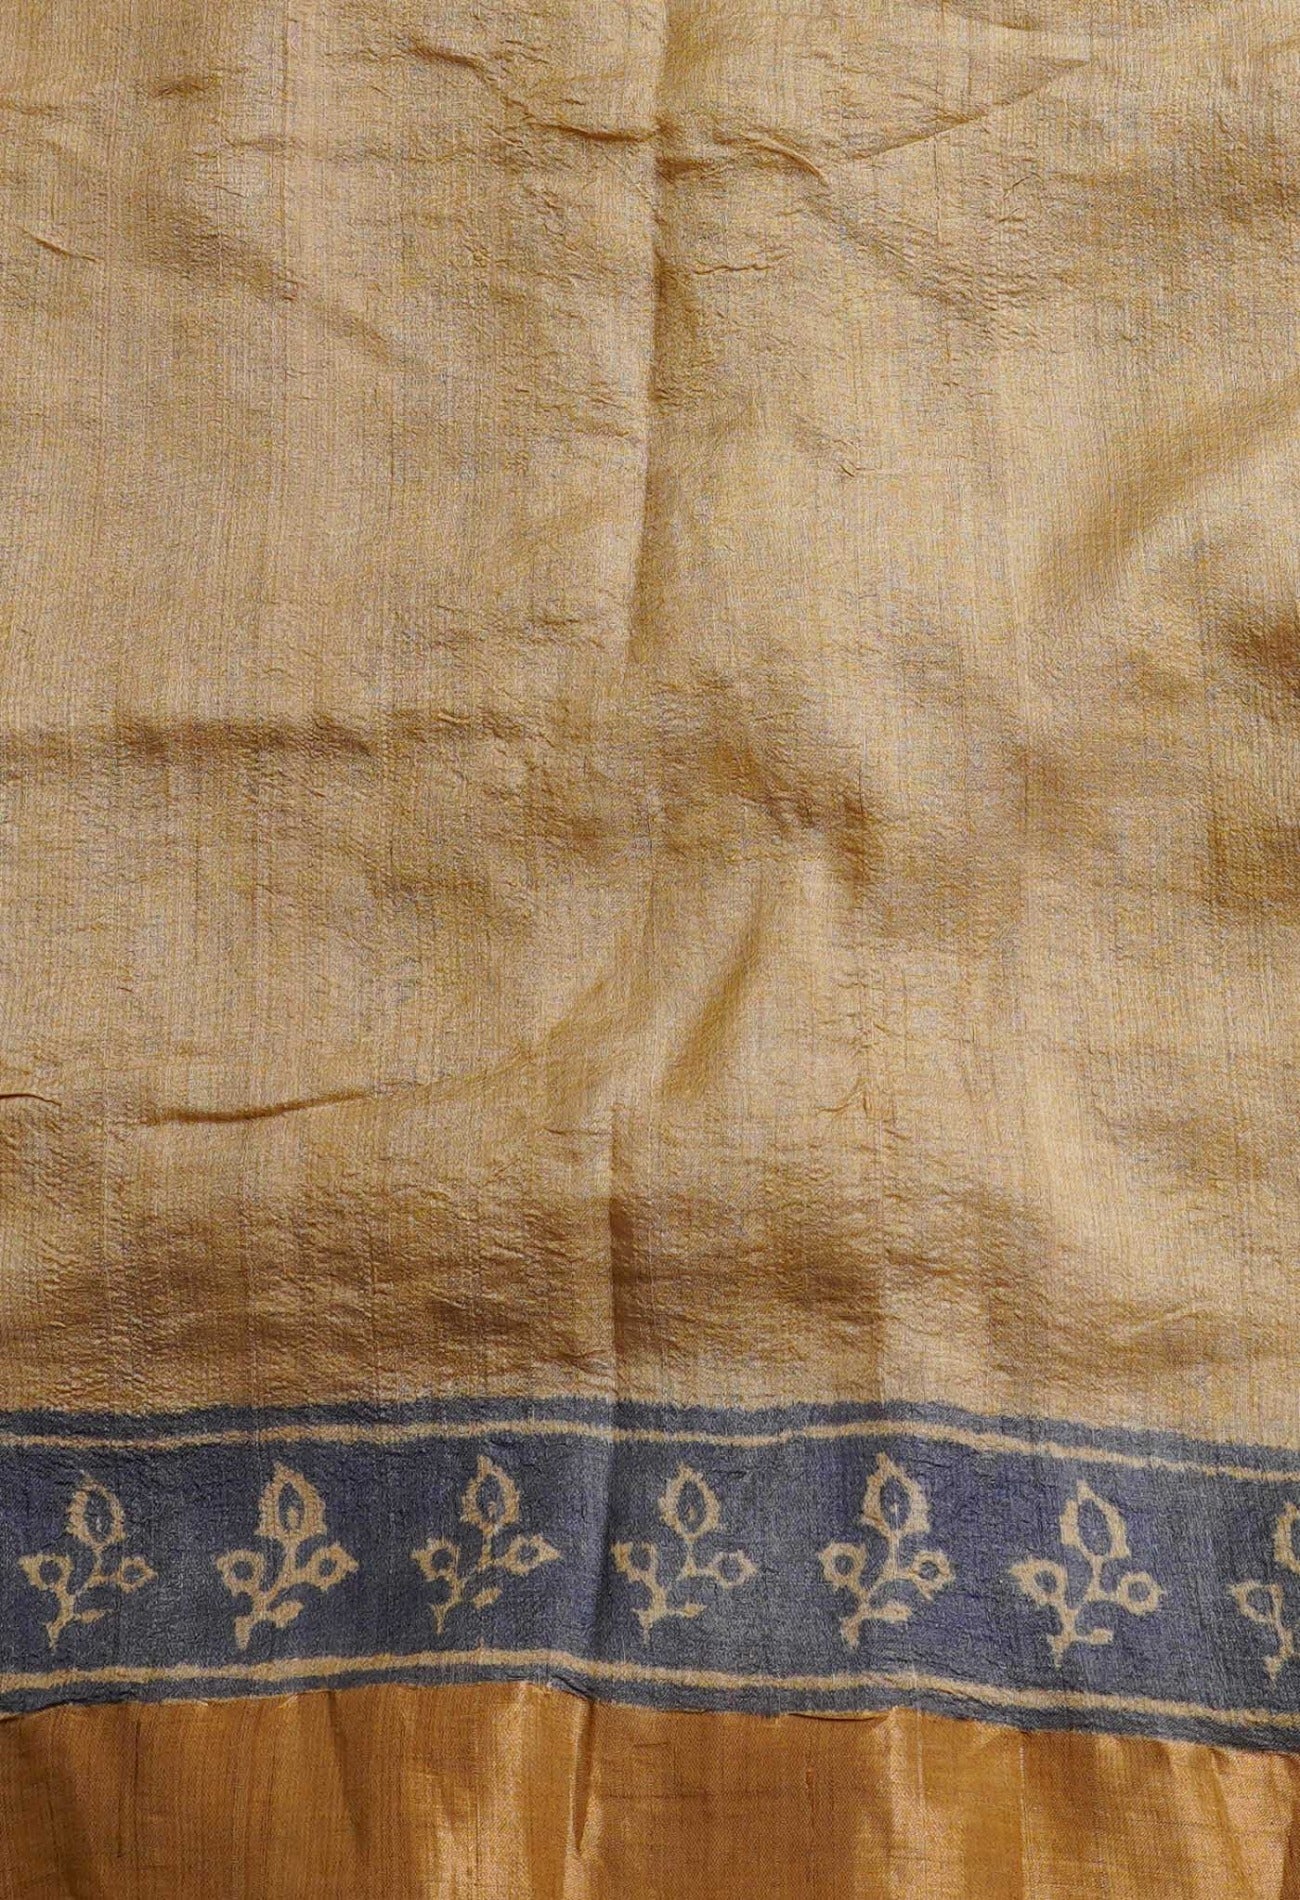 Online Shopping for Yellow Pure Handloom Block Printed Bengal Tussar Silk Saree with Hand Block Prints from West Bengal at Unnatisilks.comIndia
